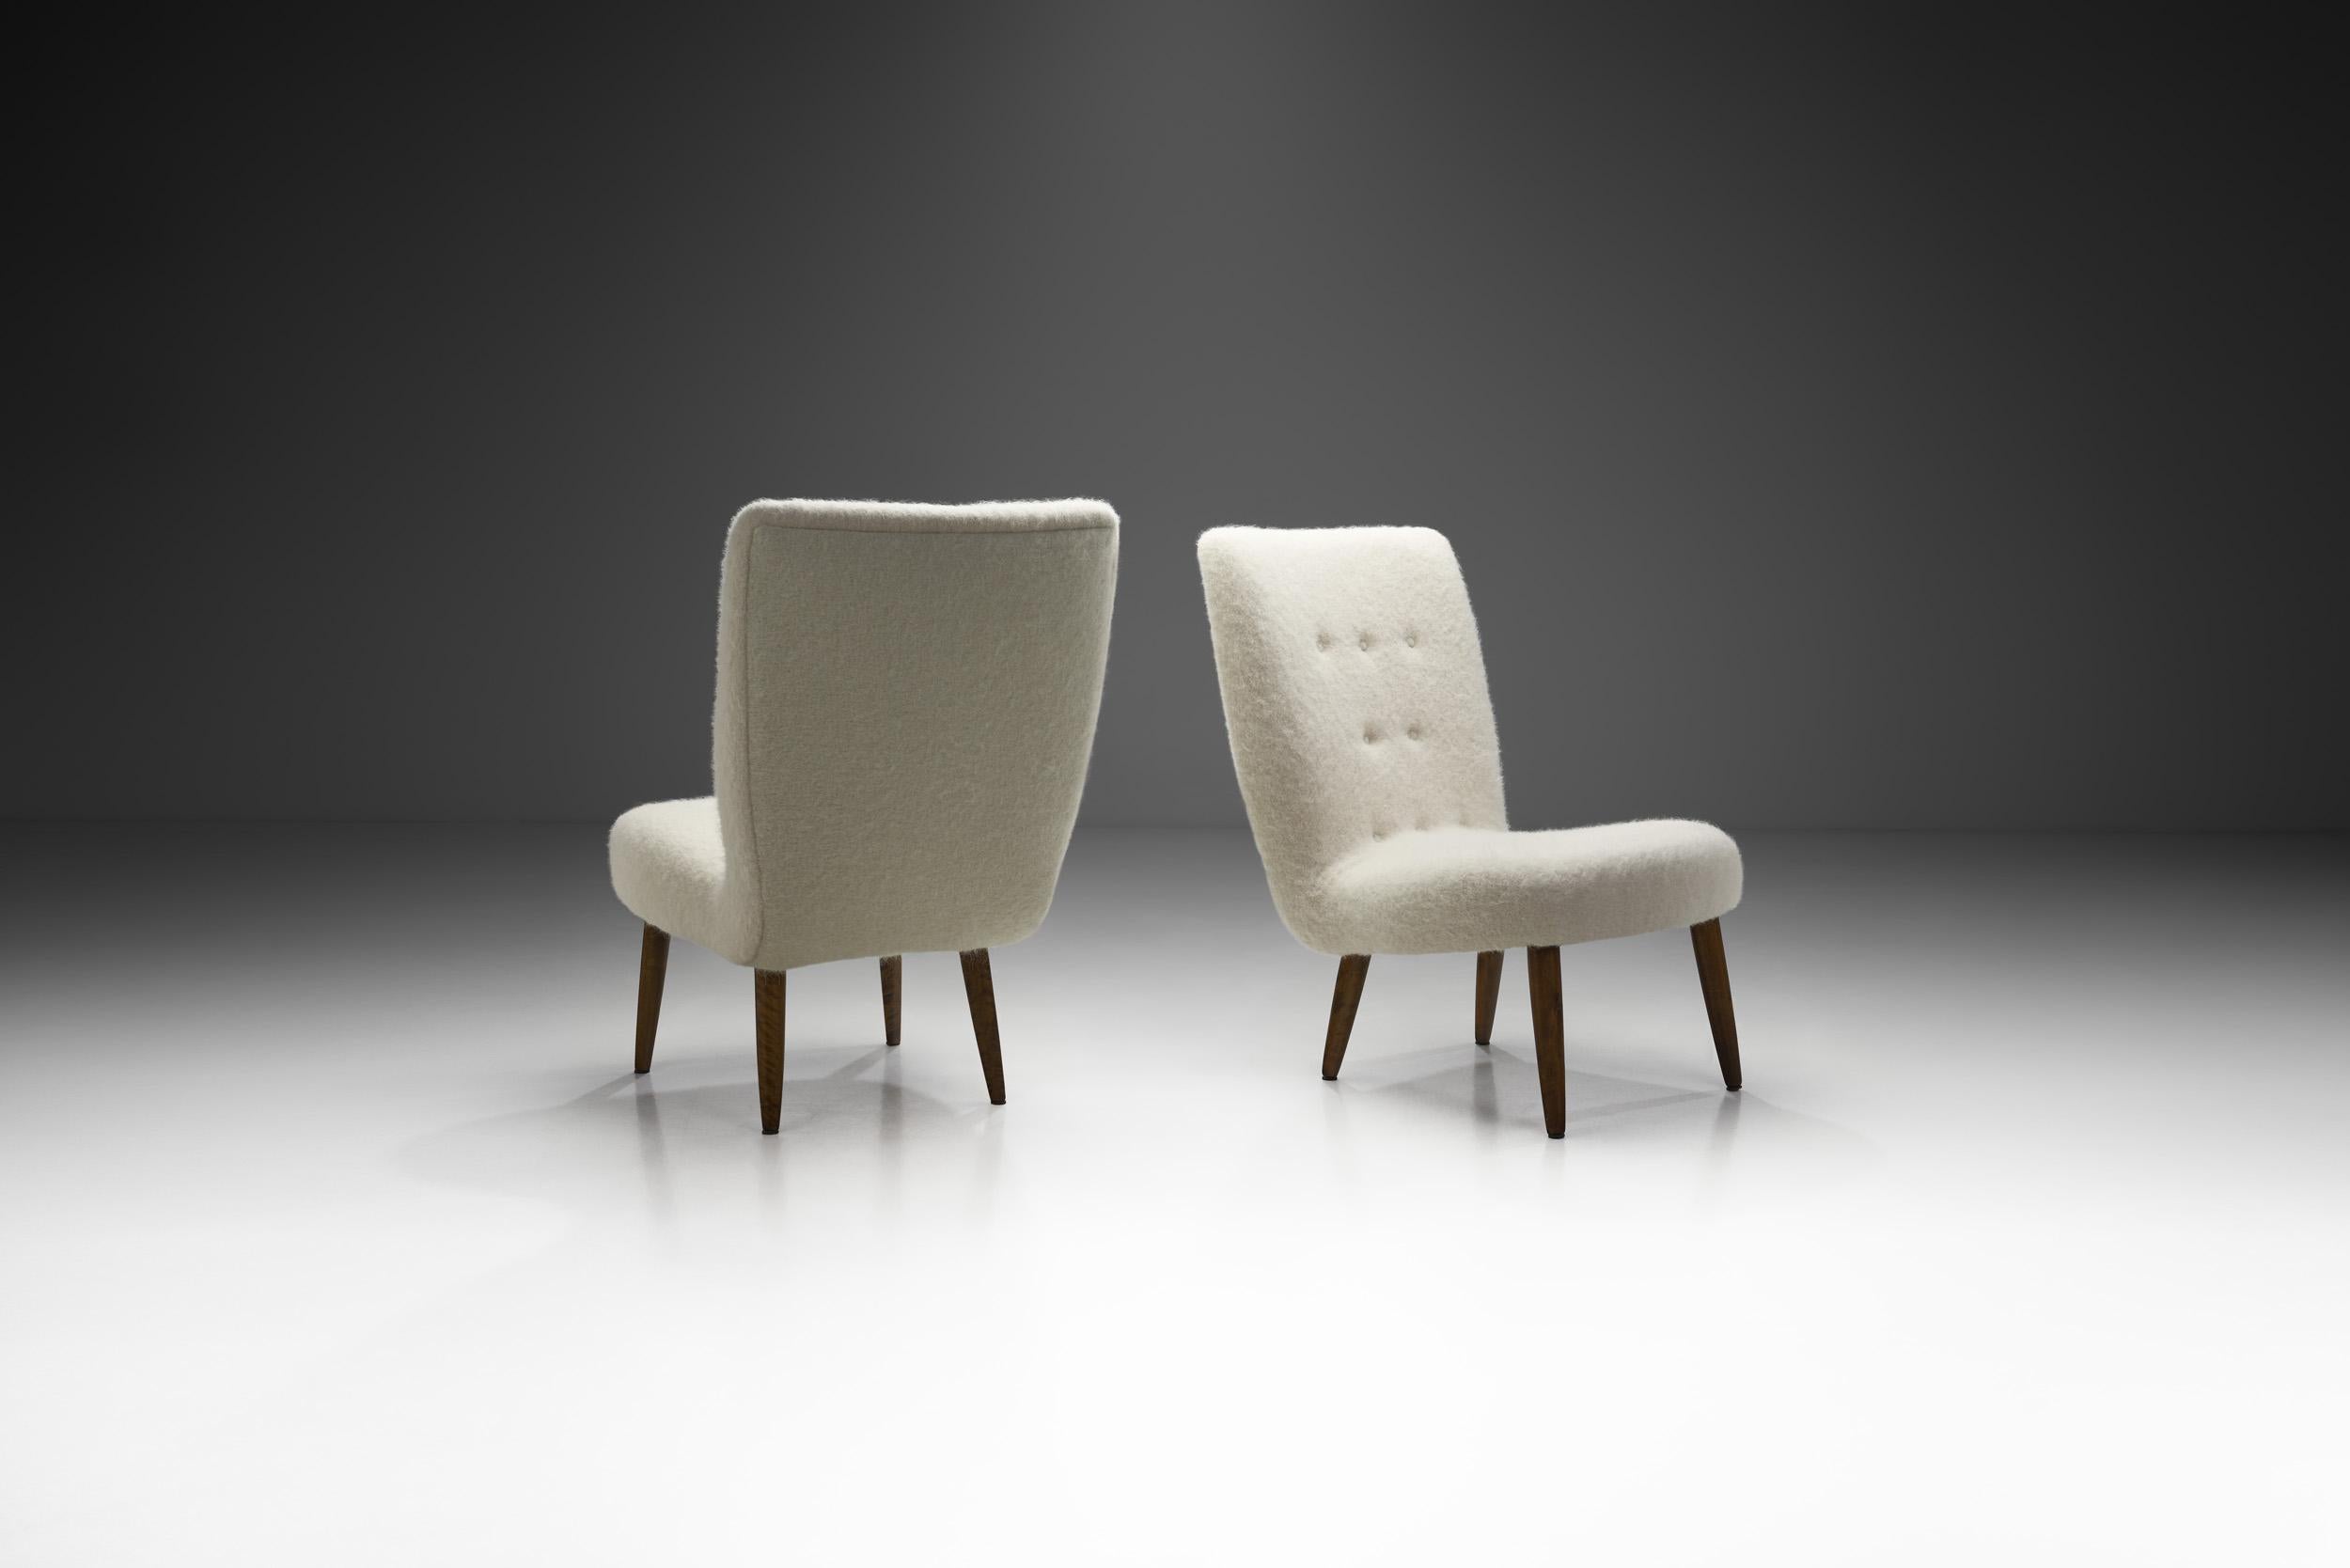 This pair of easy chairs is exemplary of the main ideals of mid-century modernism: the chairs are characterized by clean, simple lines, honest use of materials, and a lack of unnecessary decorative embellishments. Instead, the focus is on